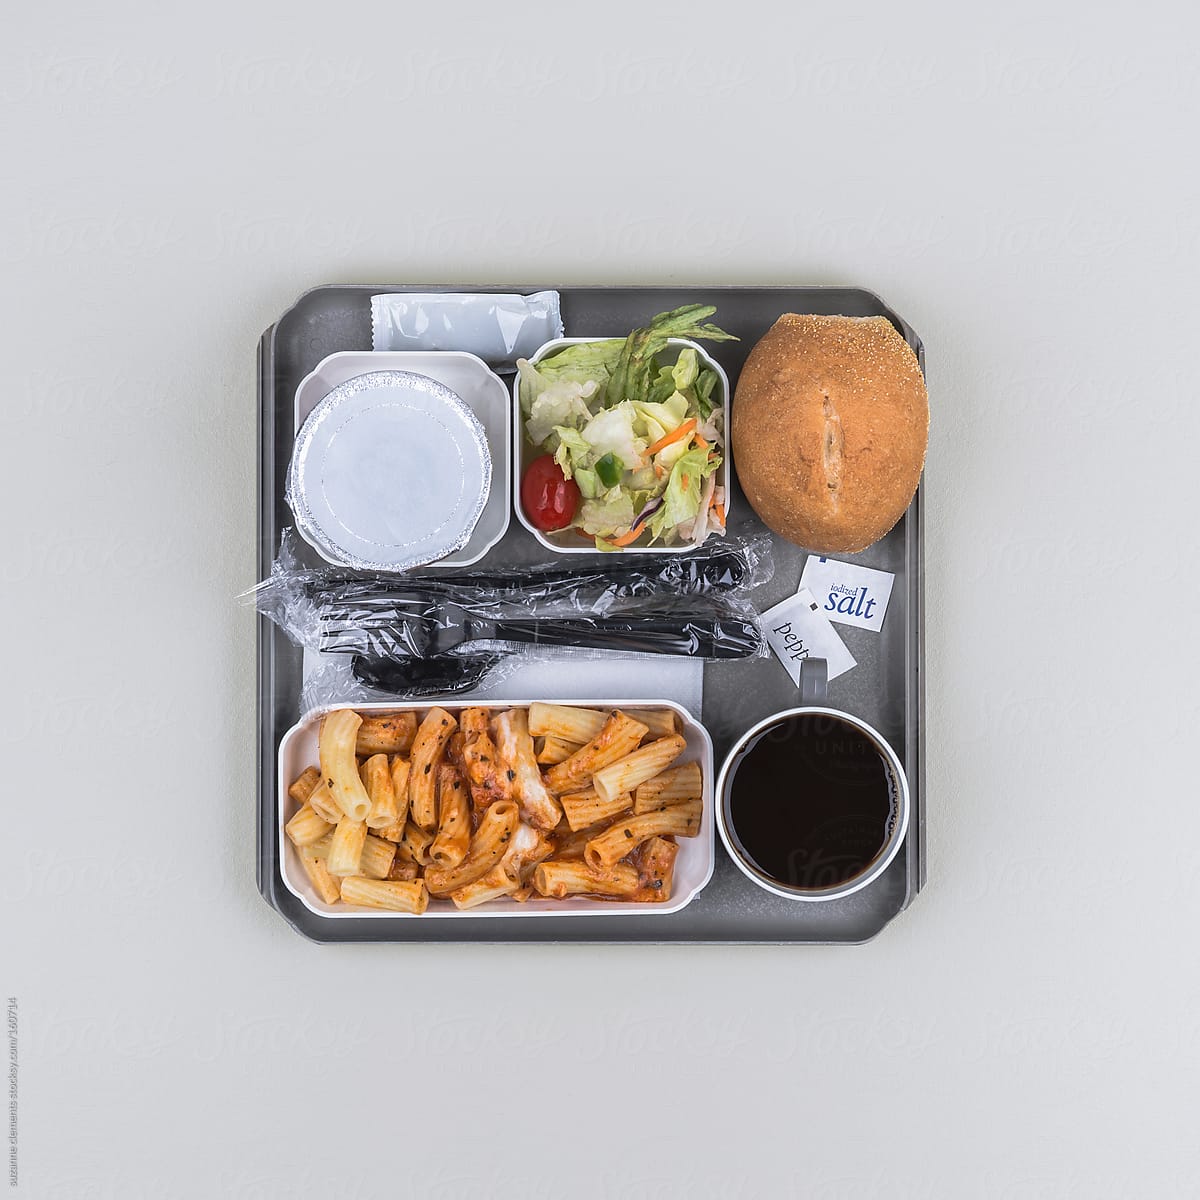 This Airline Meal Only Looks Good When You\'re Trapped on a Long Flight